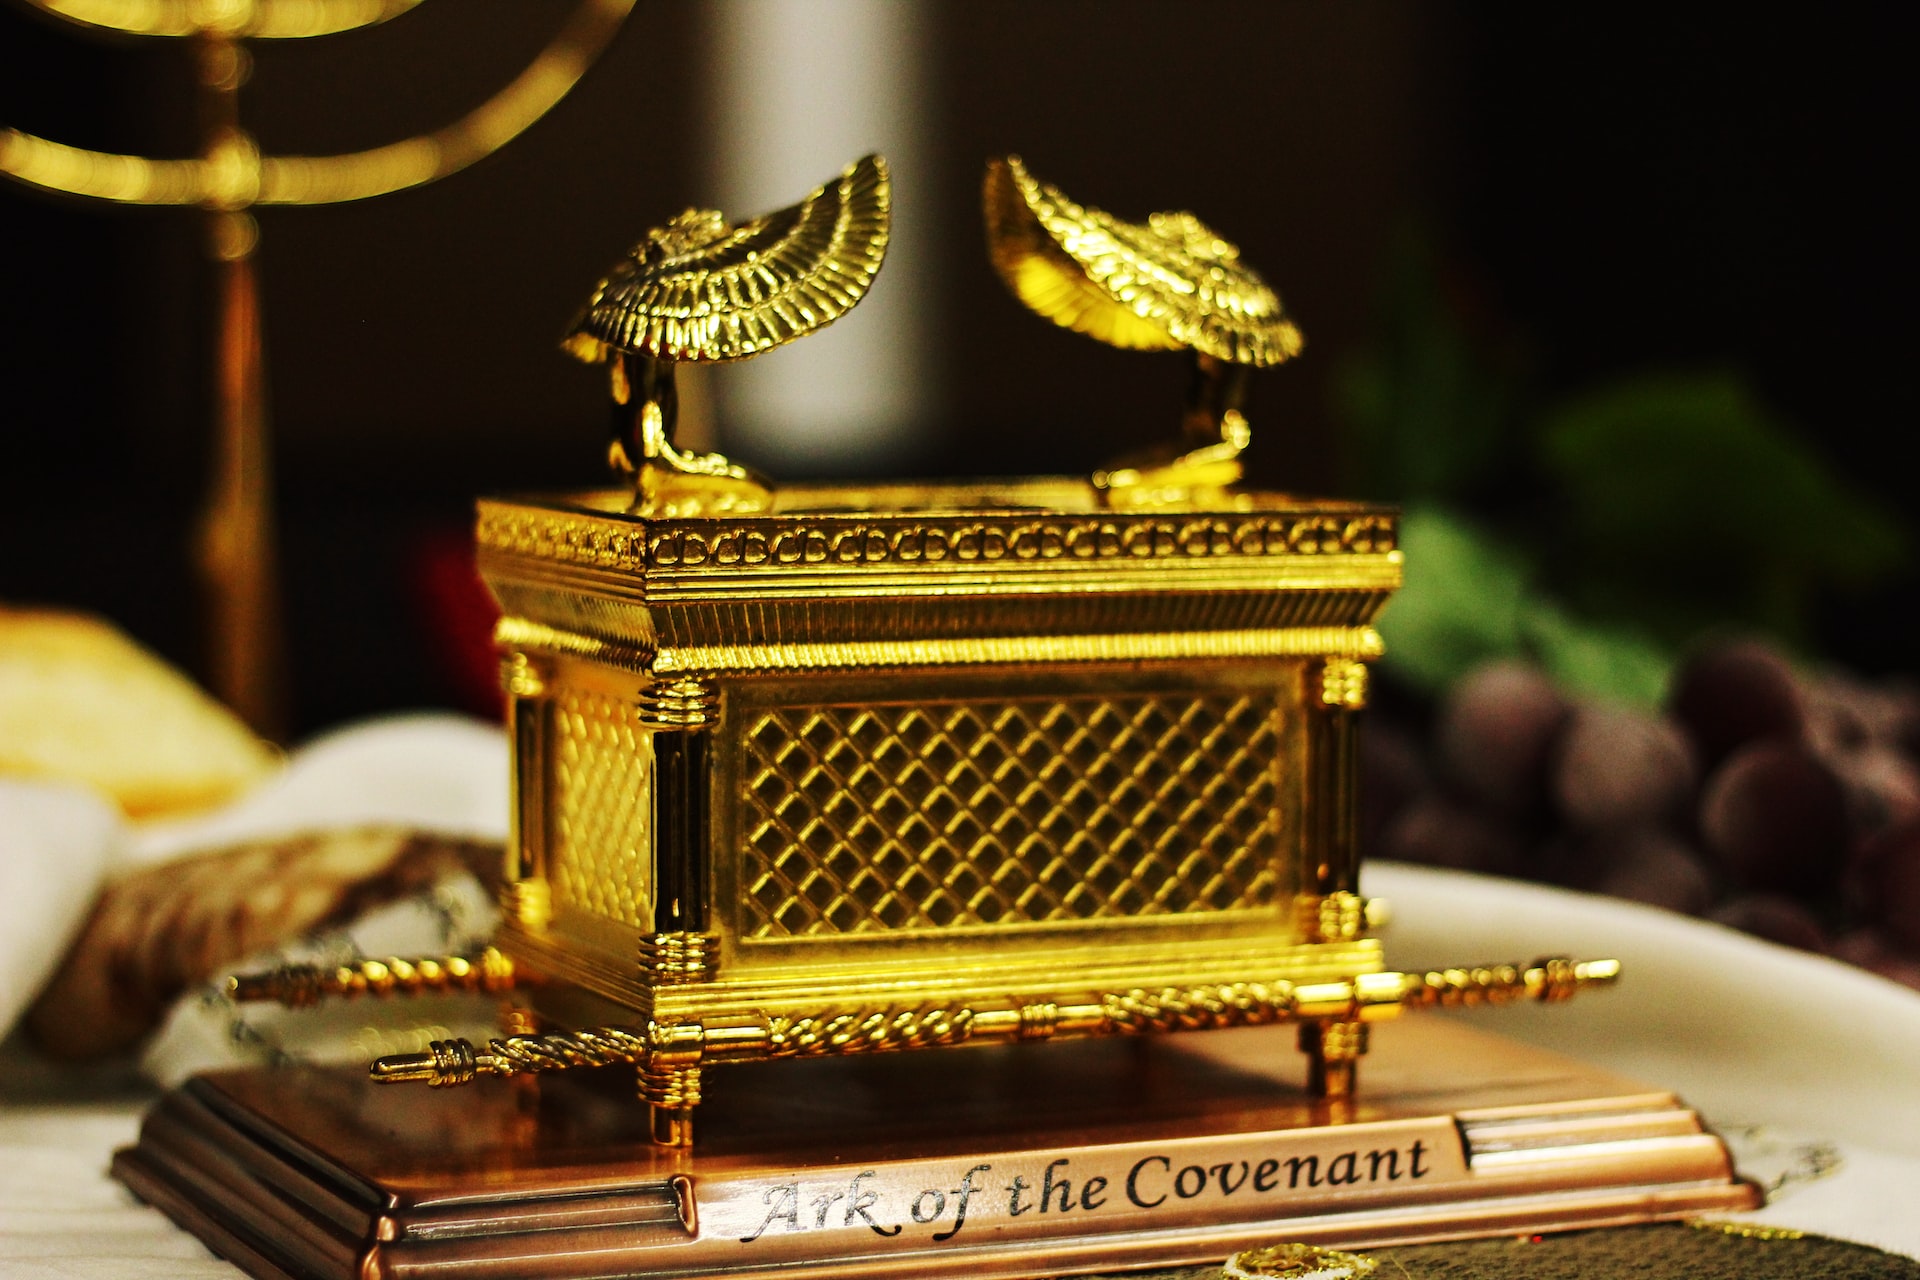 Who tried to steady the ark of the Covenant?